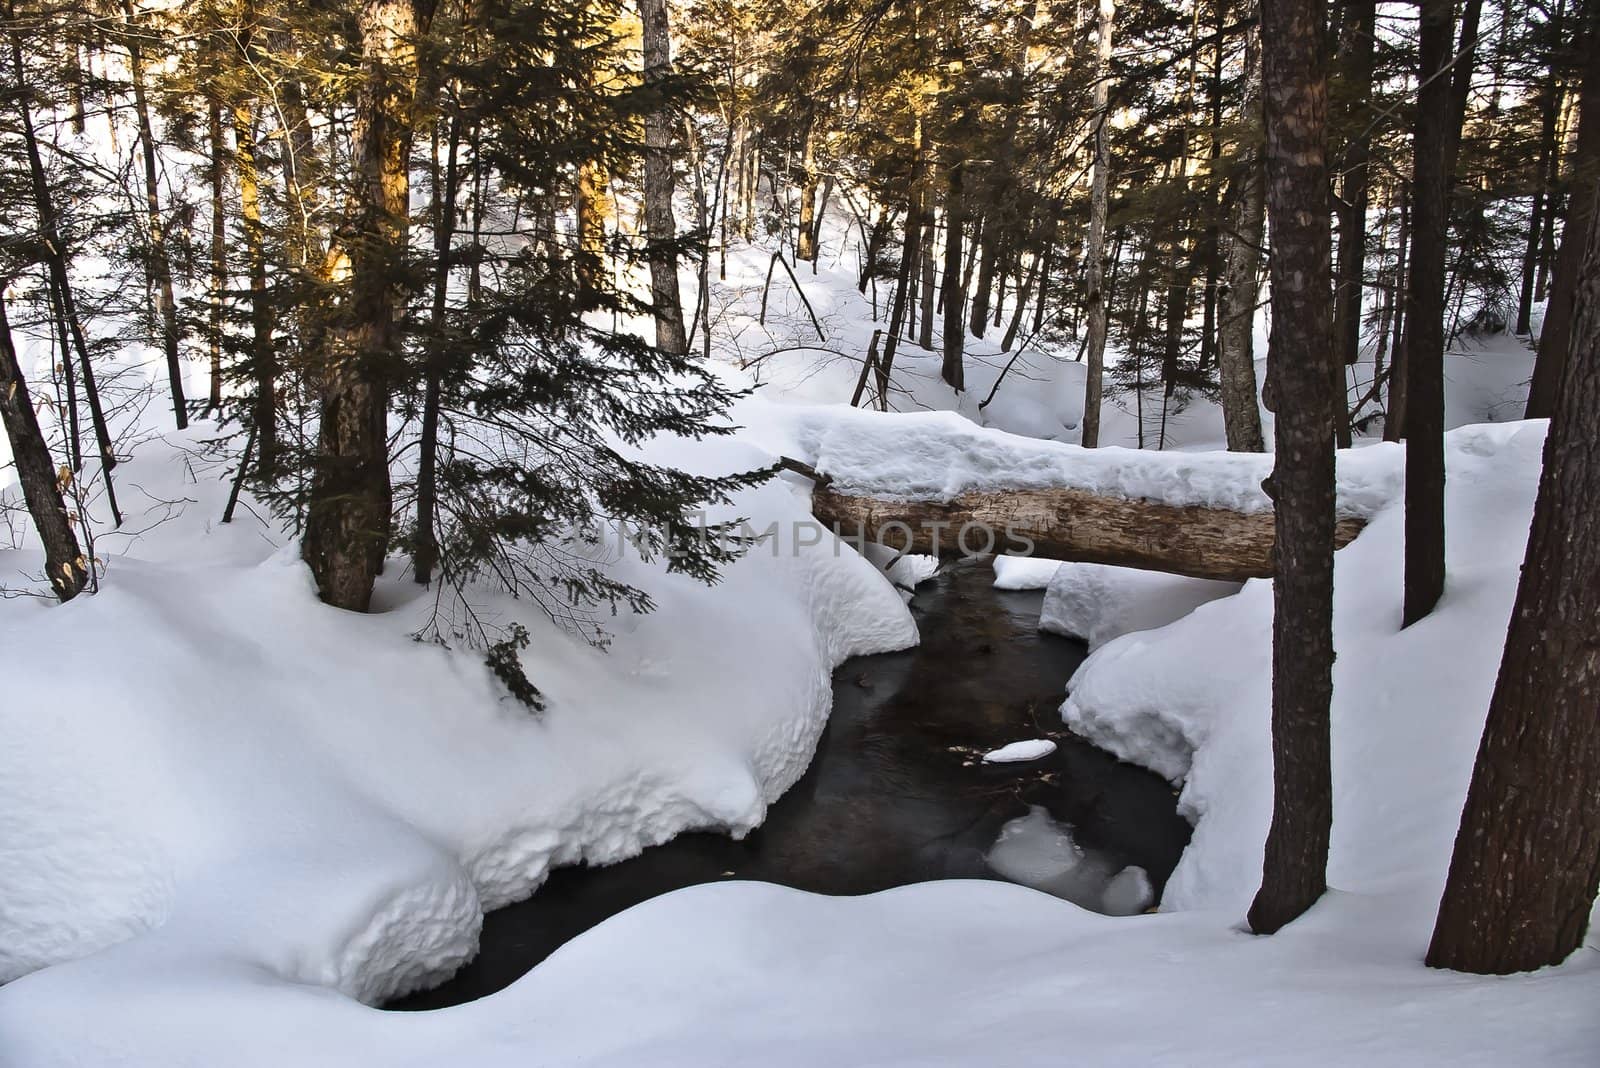 A tree has fallen in the snow covered forest over a winding stream.